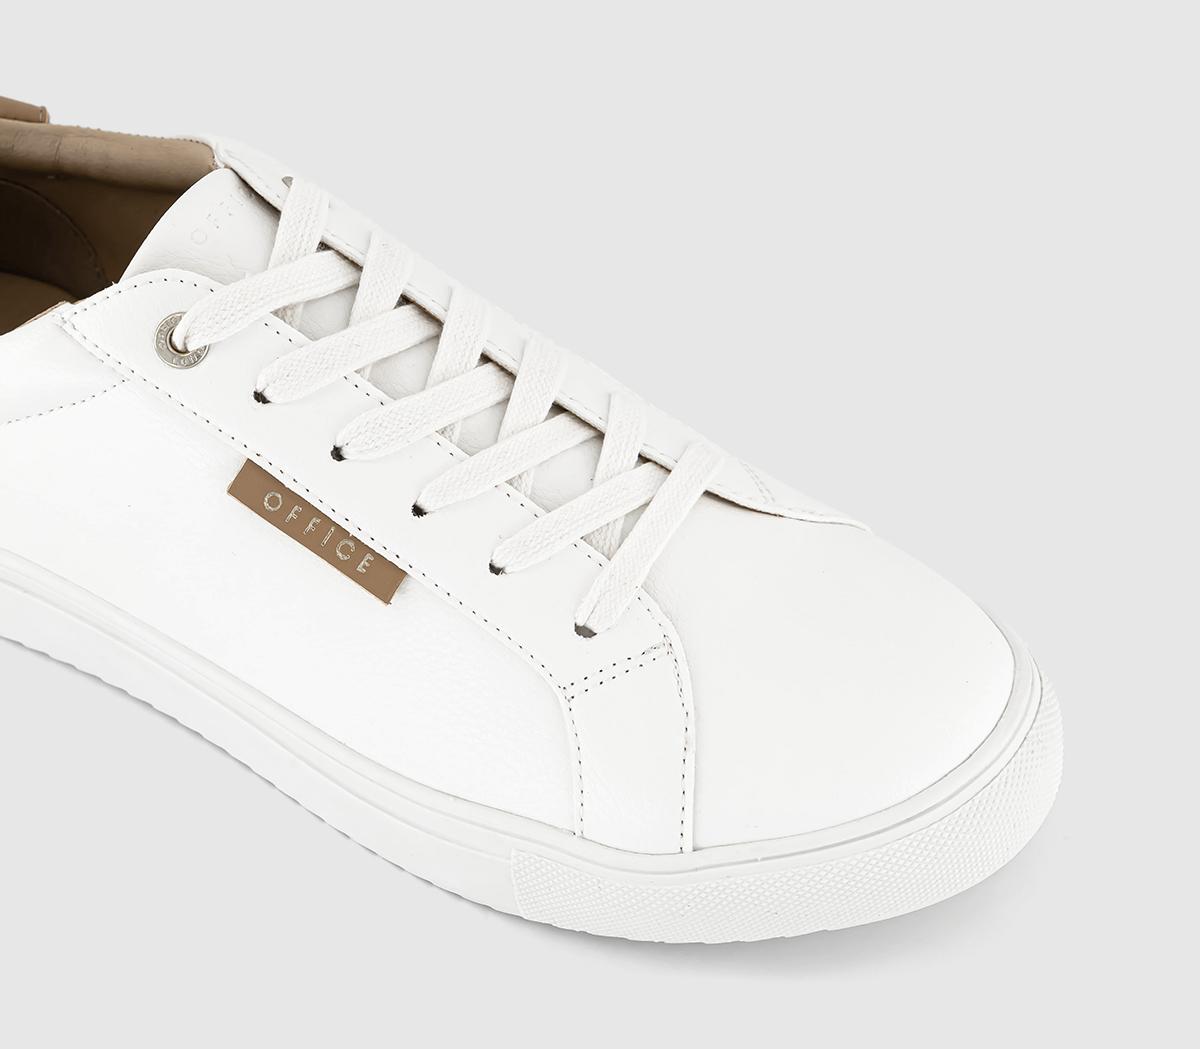 OFFICE Floating Lace Up Trainers White Tan - Fashion Trainers